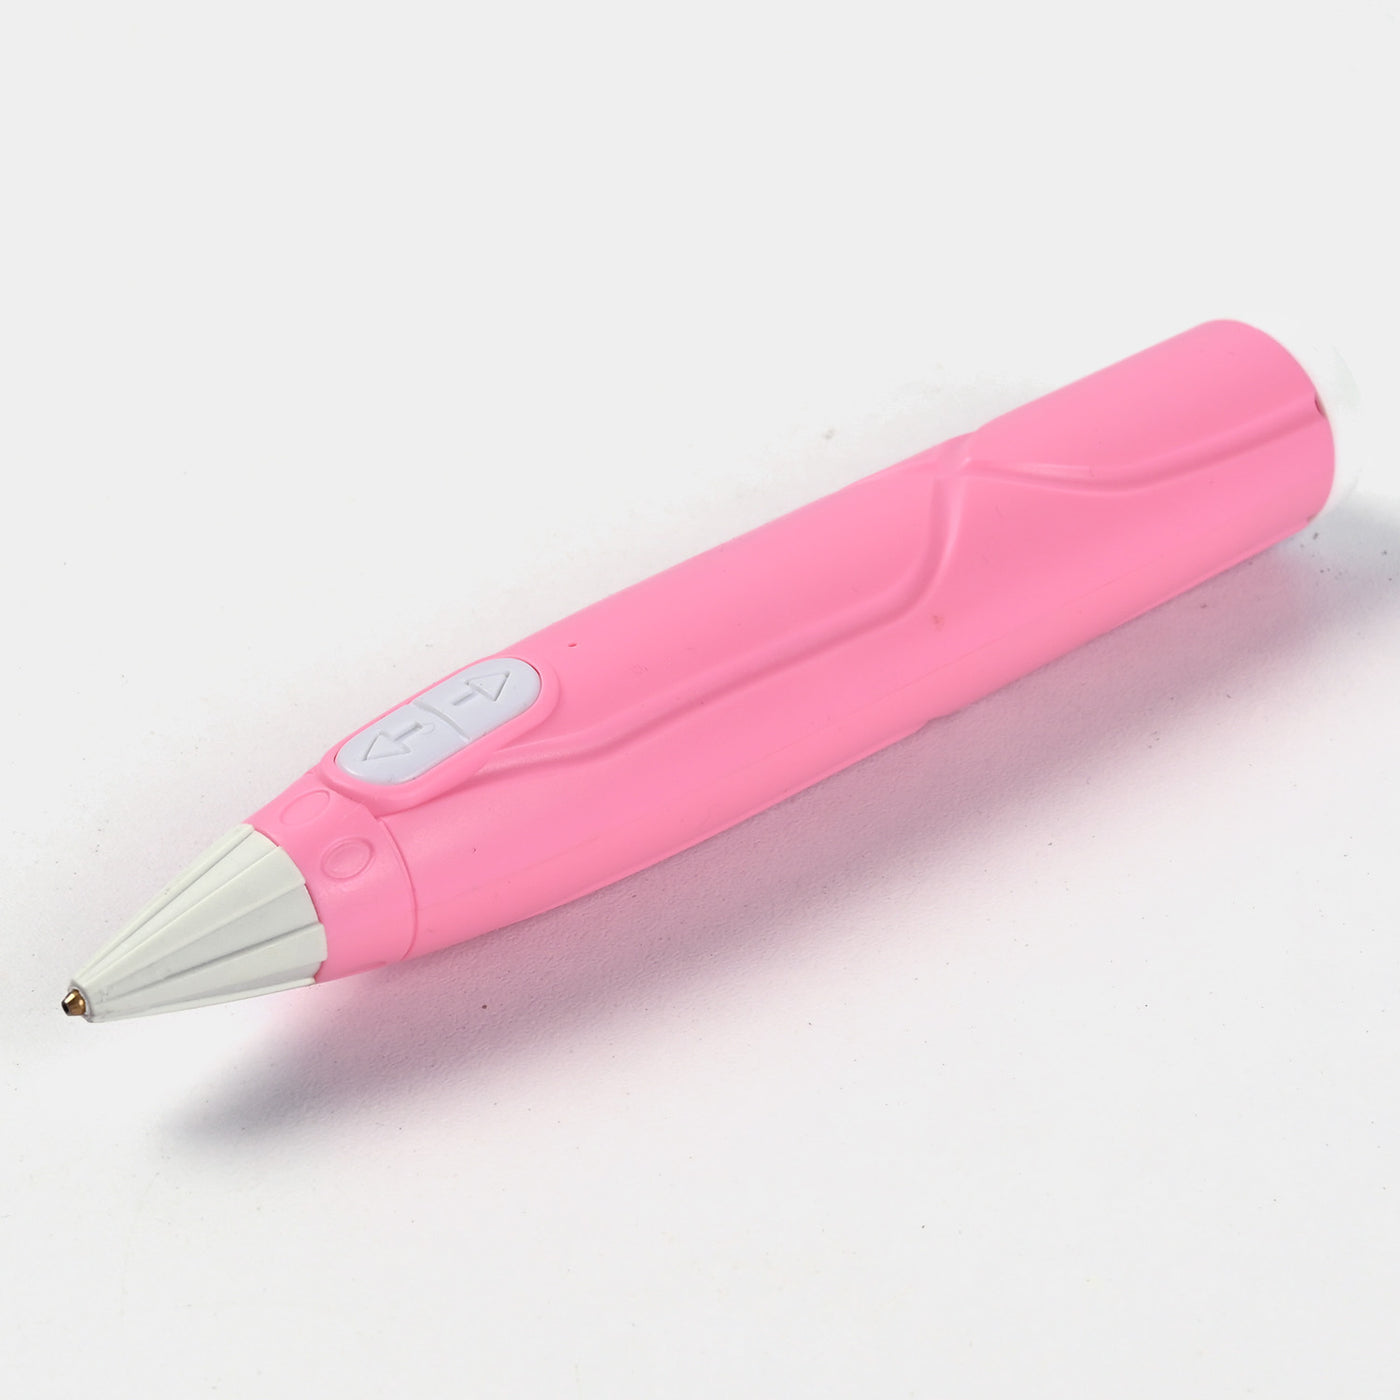 3D Printing Pen With Tool For Kids